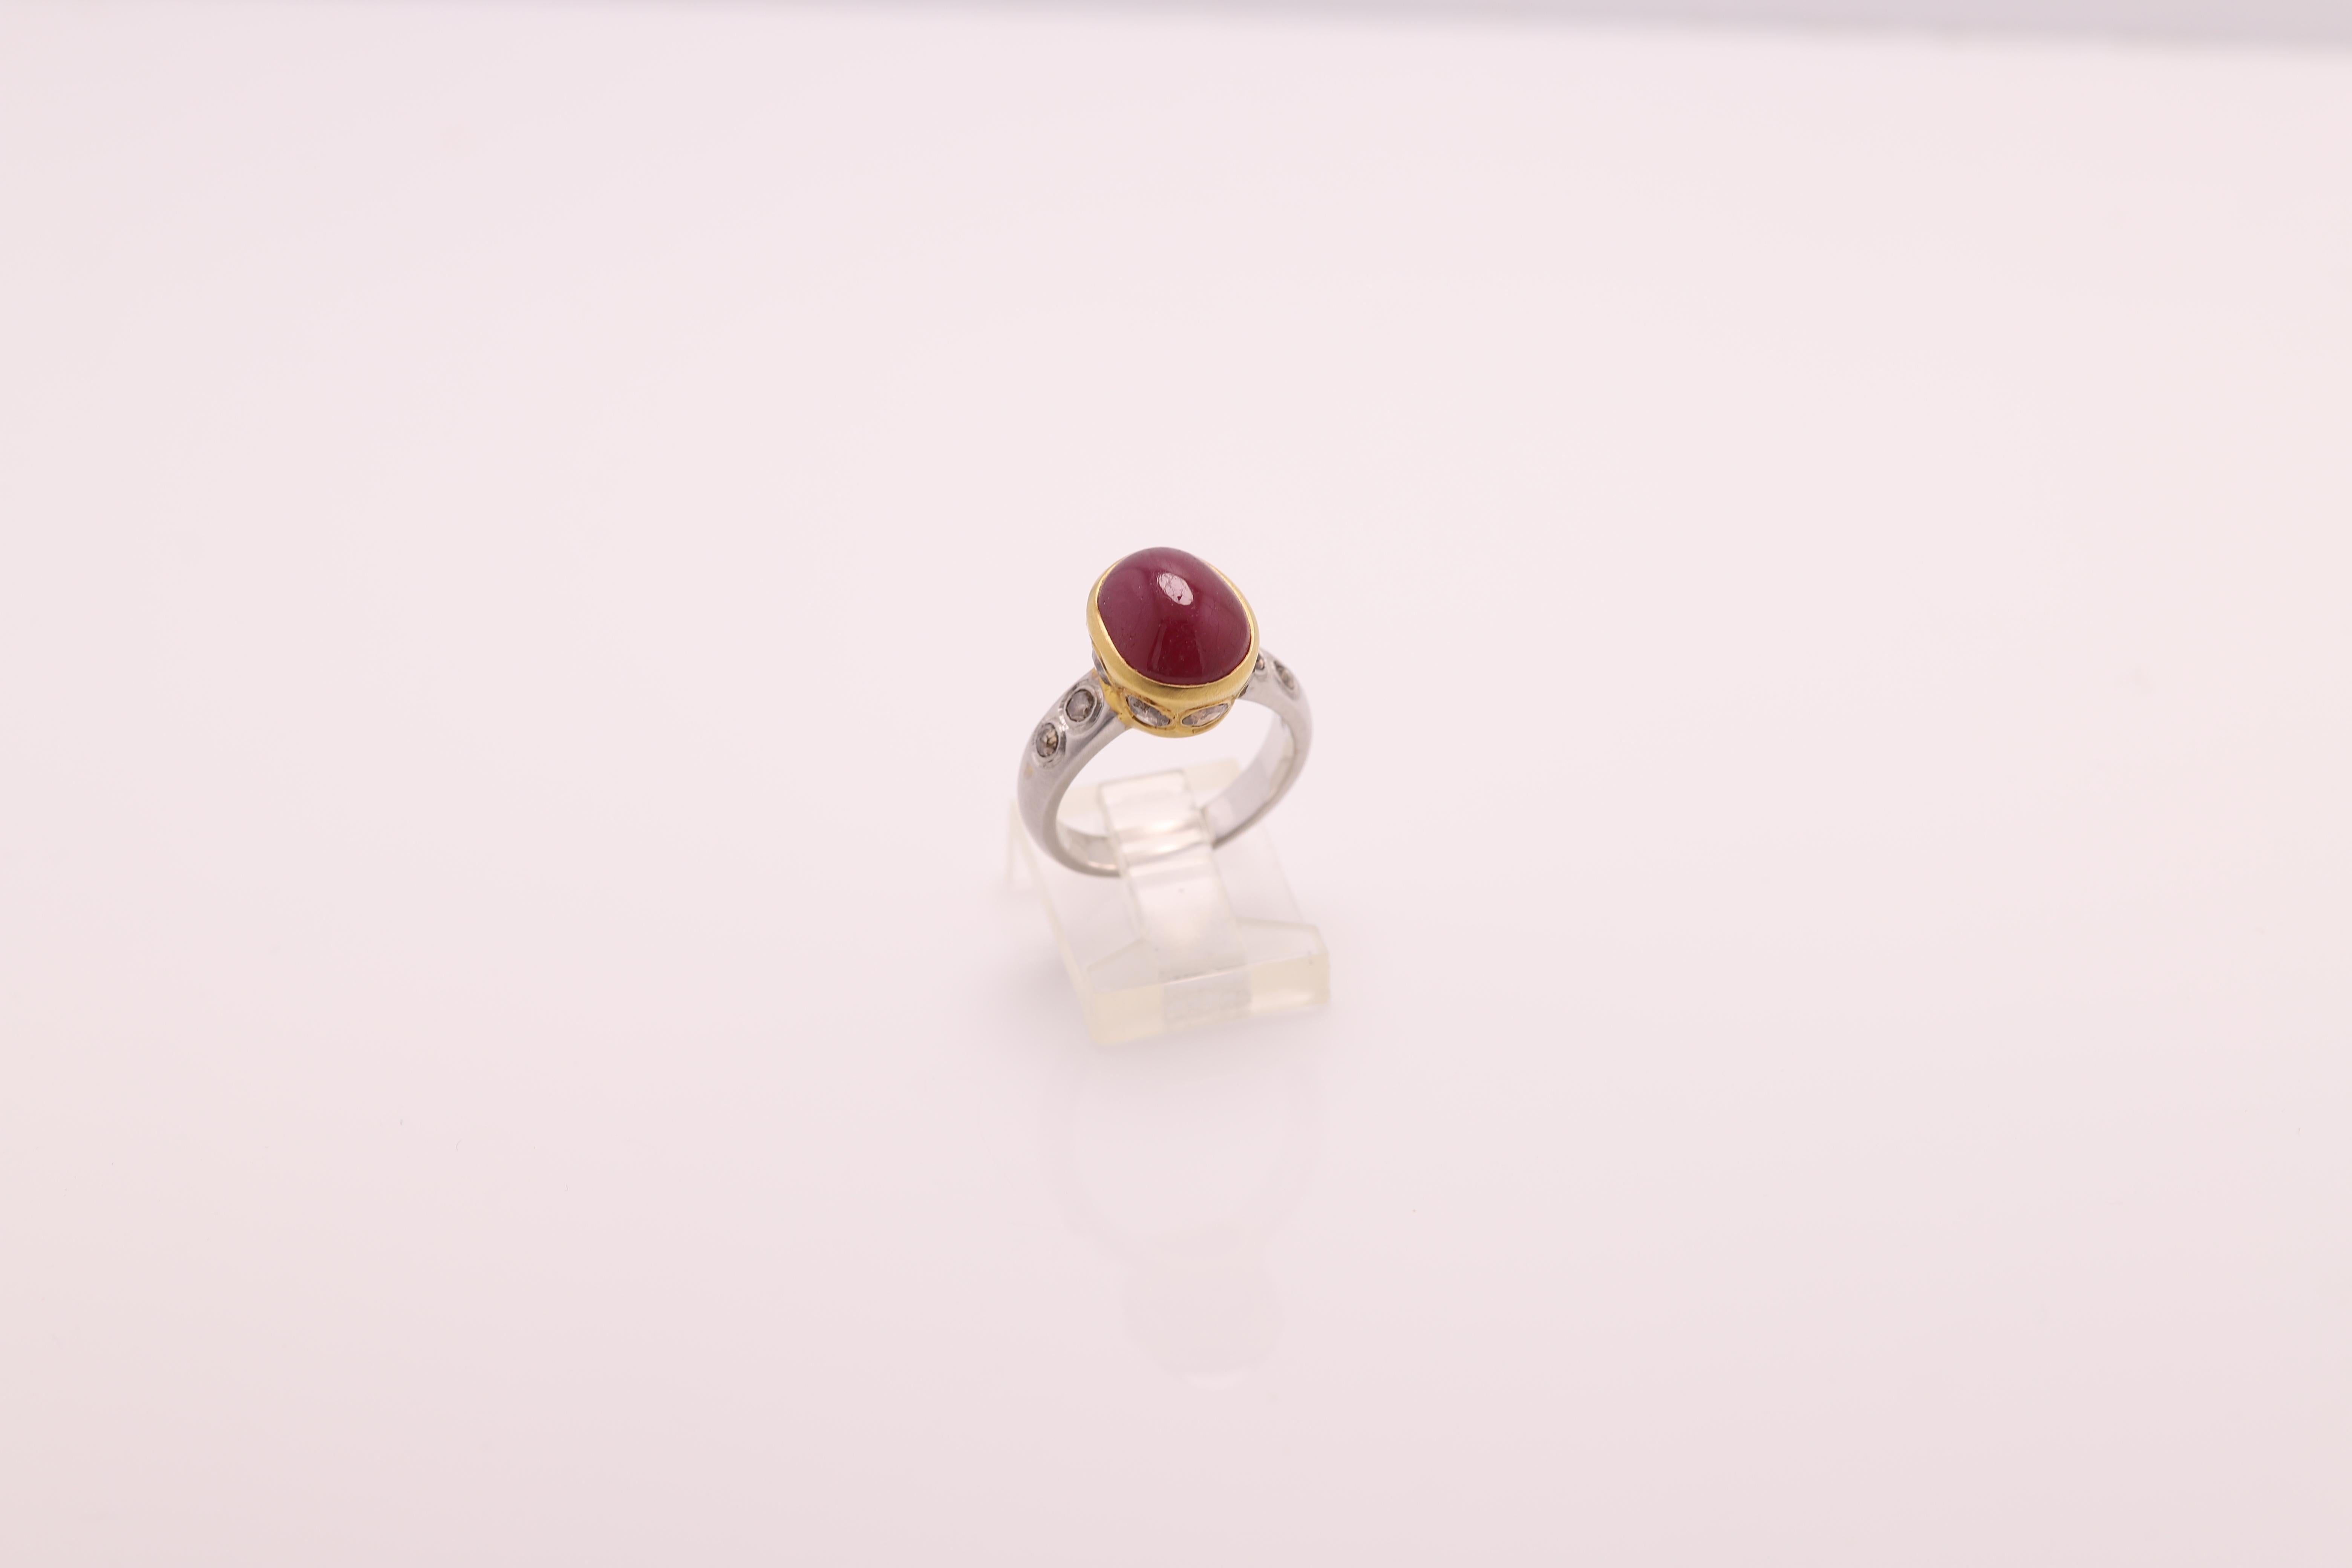 Vintage Ruby & Diamonds - Hand Made in Italy
18k White and Yellow Gold 7.0 grams 
Ruby 4.0 Carat Oval Cabochon shape,  approx size 11 x 9 mm Dark Red Tone & Bezel set
Old Cut Champagne /Light Brown Diamonds on the sides 1.00 carat
Finger size 8
All